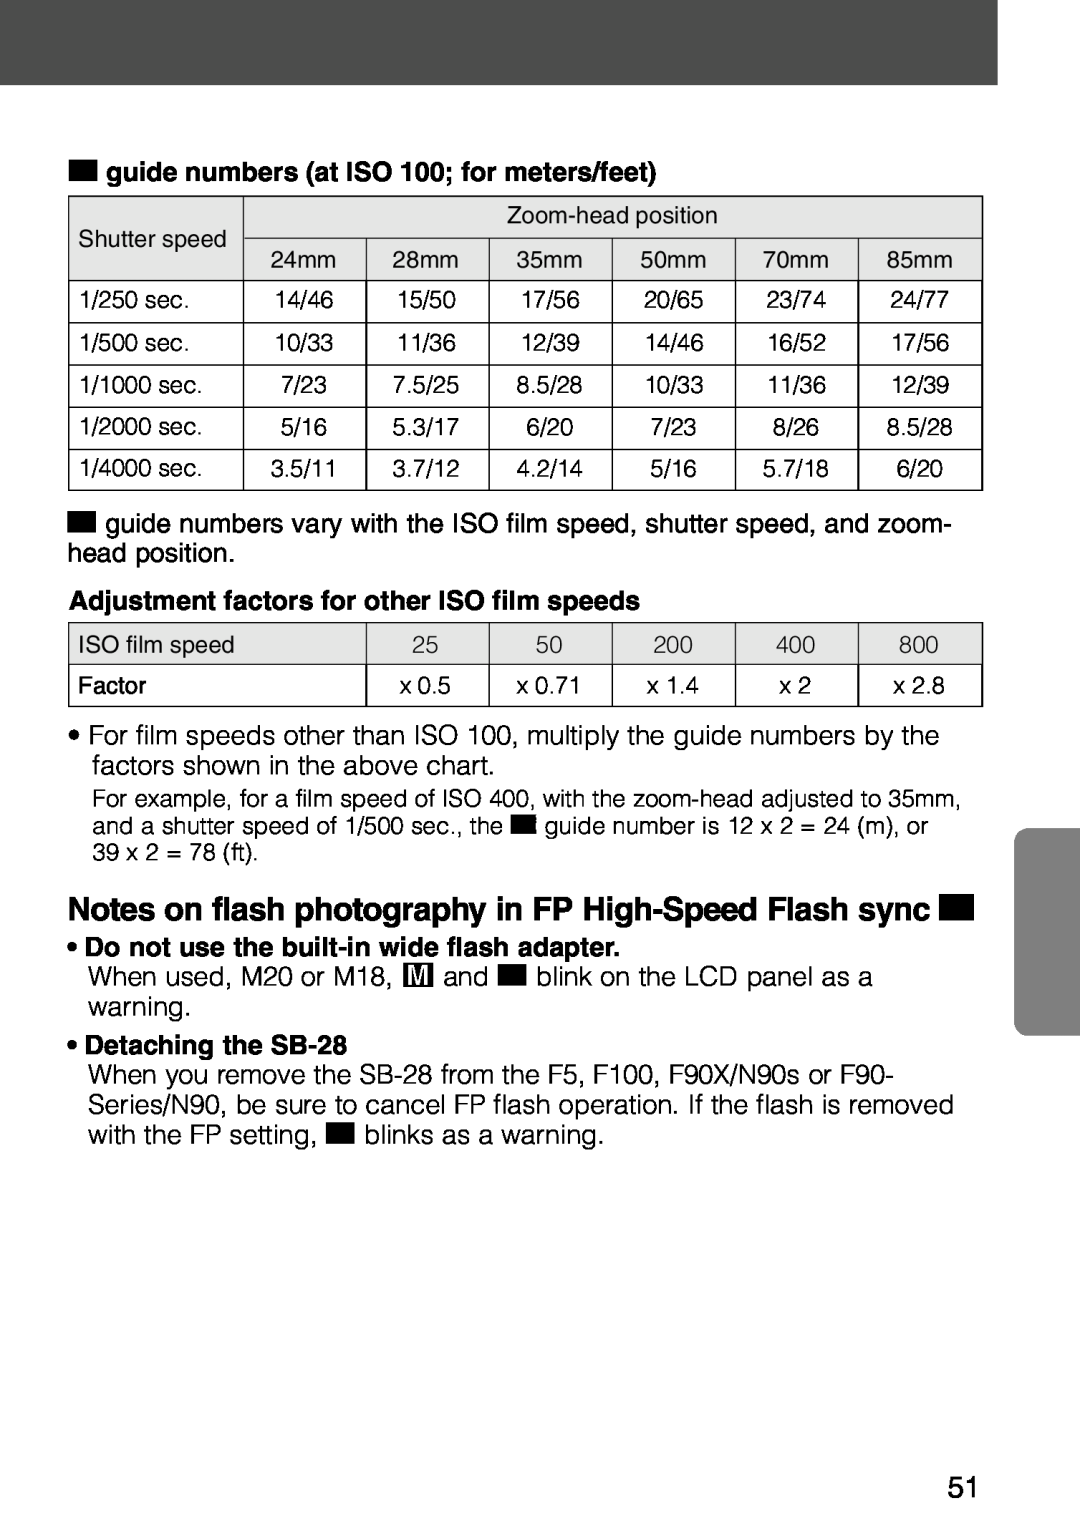 Nikon guide numbers at ISO 100 for meters/feet, Adjustment factors for other ISO film speeds, Detaching the SB-28 